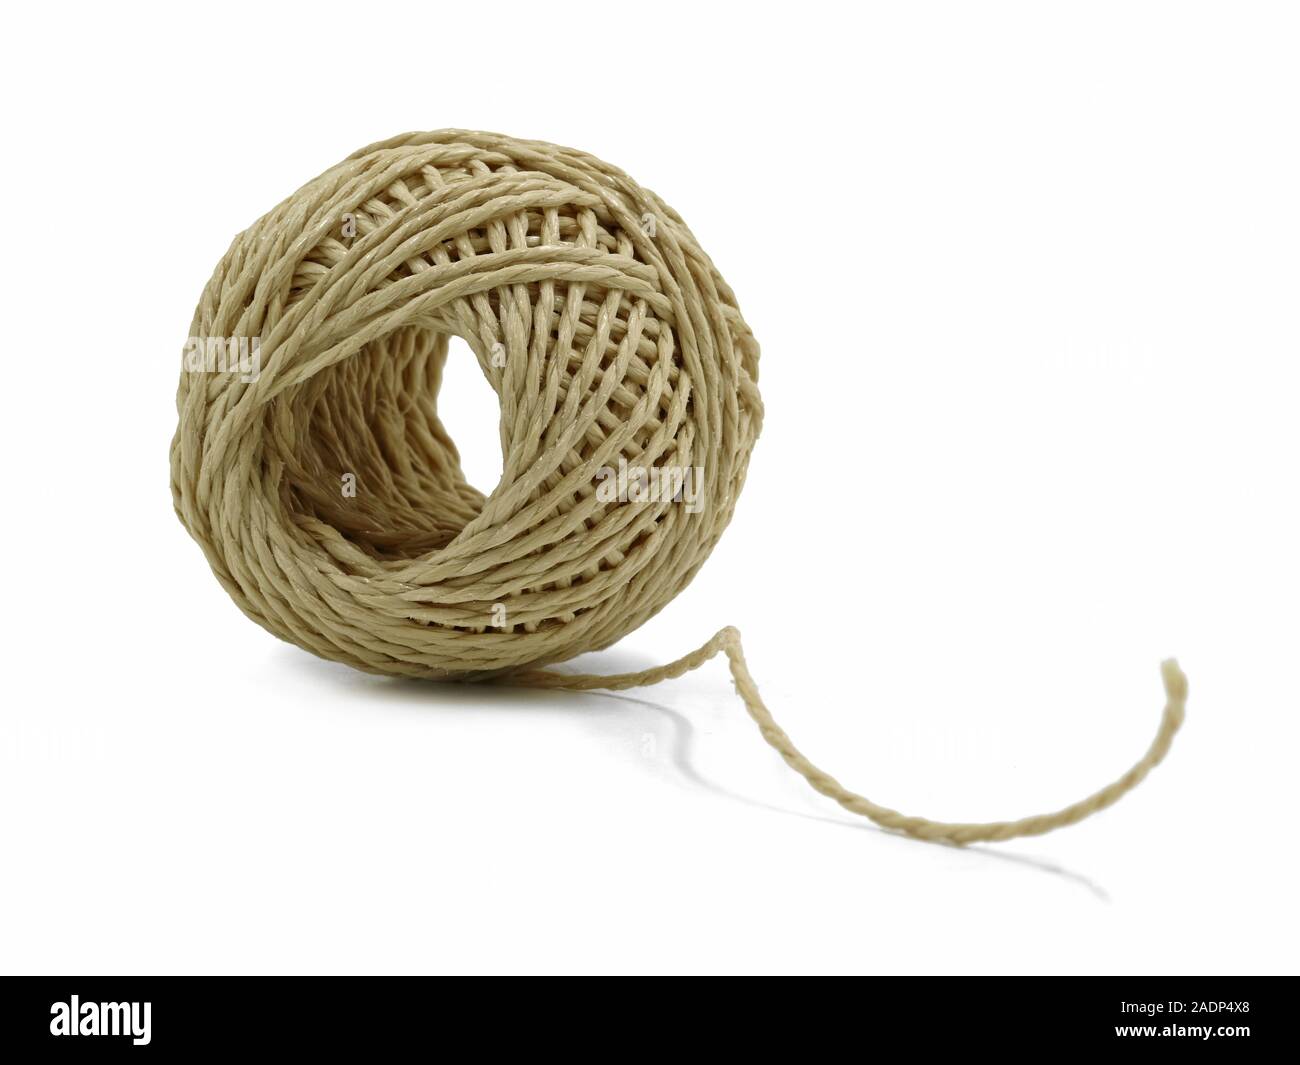 Natural Jute Twine Roll Top View On White Wood Background Diy Wrap Gift  Hemp Rope Cord String Roll Supplies And Tools For Handmade Hobby Leisure  Stock Photo - Download Image Now - iStock